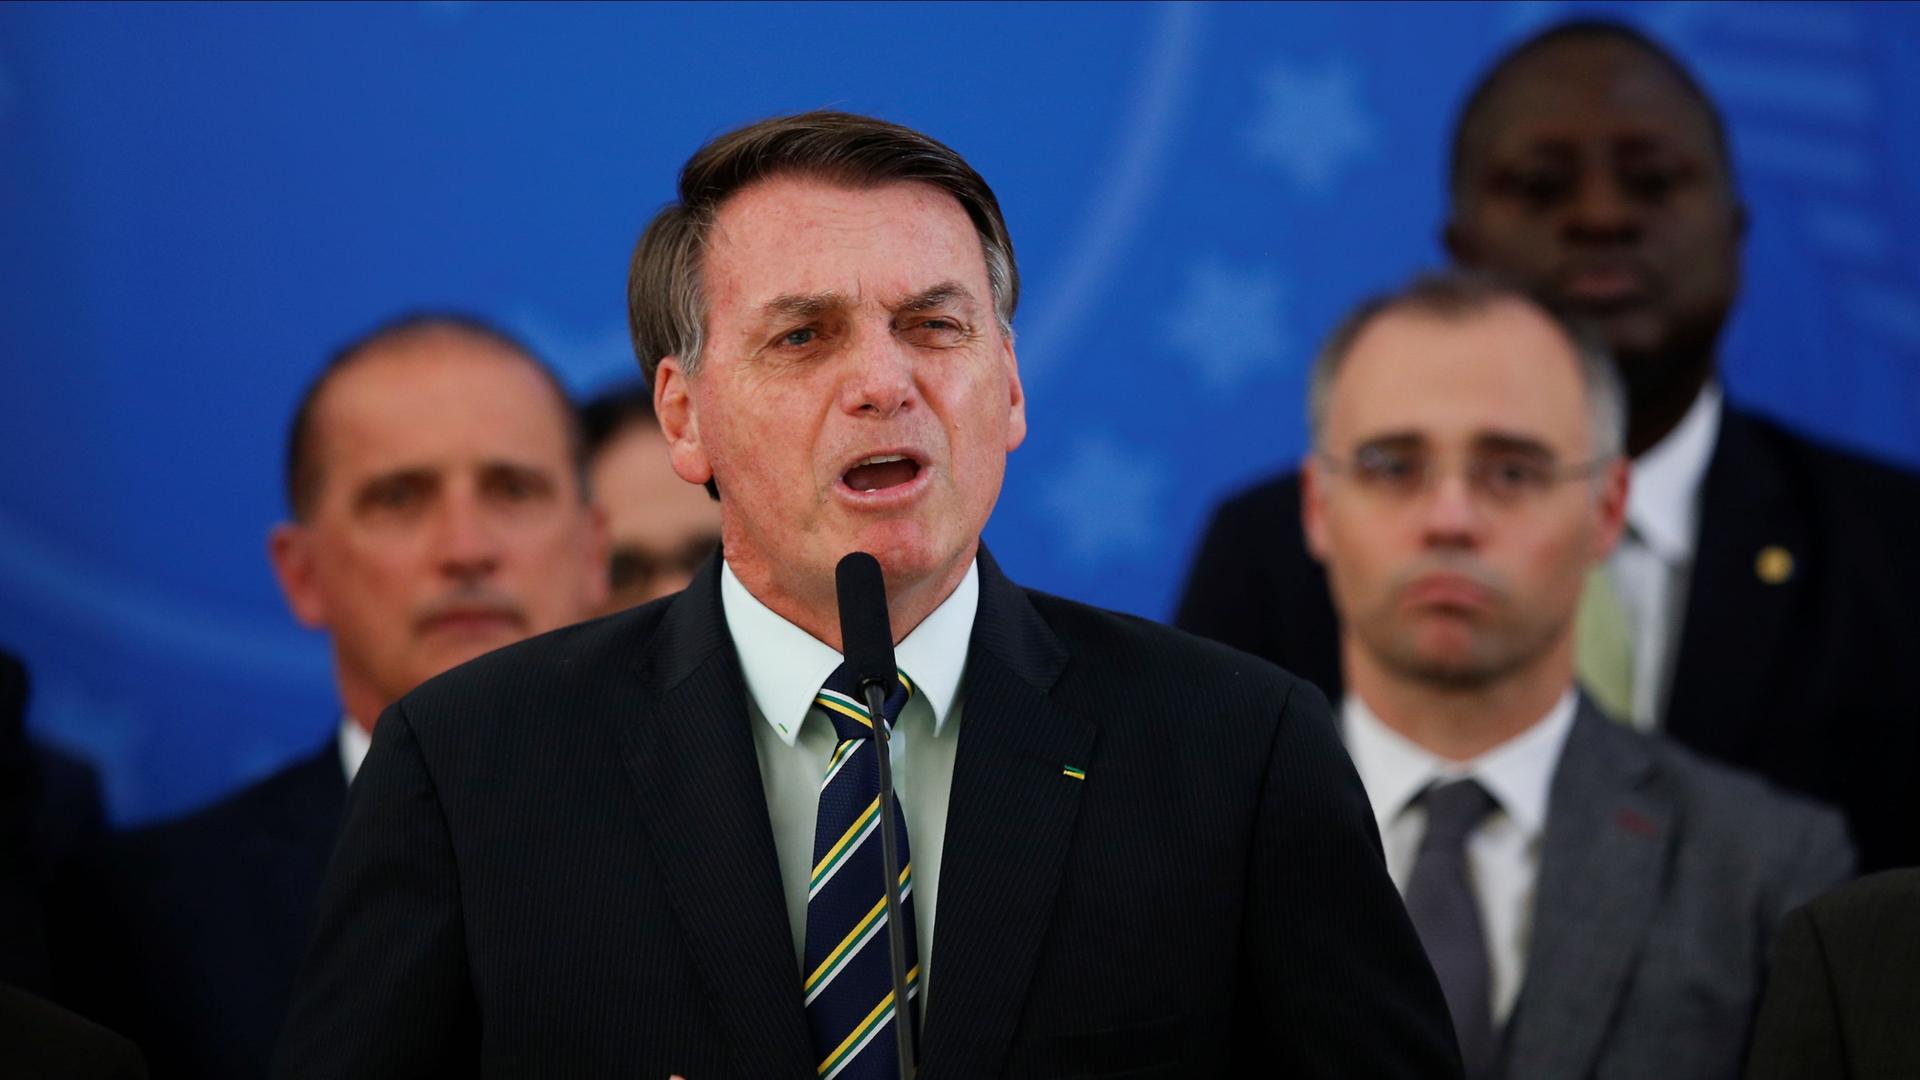 Brazil's President Jair Bolsonaro reacts while addressing the media during a news conference at the Planalto Palace in Brasilia, Brazil, April 24, 2020. 